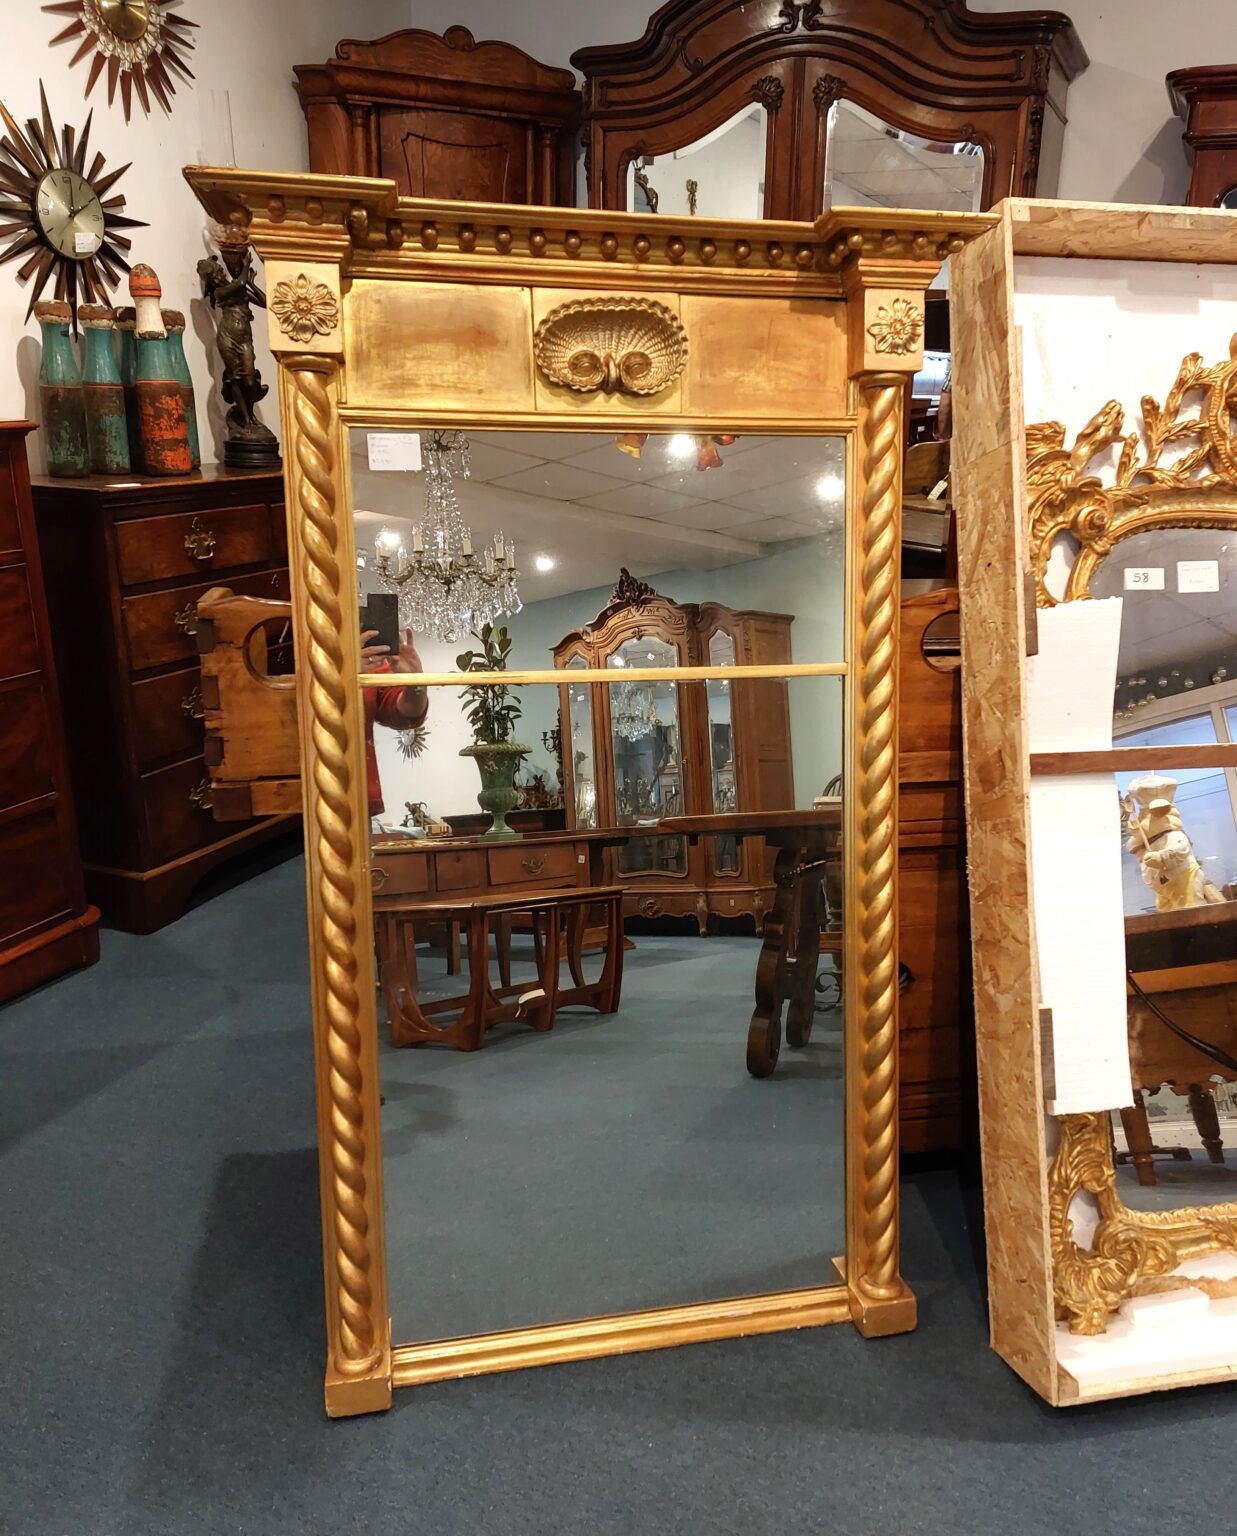 Regency Gilt Mirror. Rope design at sides. rosettes and shell shape at top. Town and Country Antiques